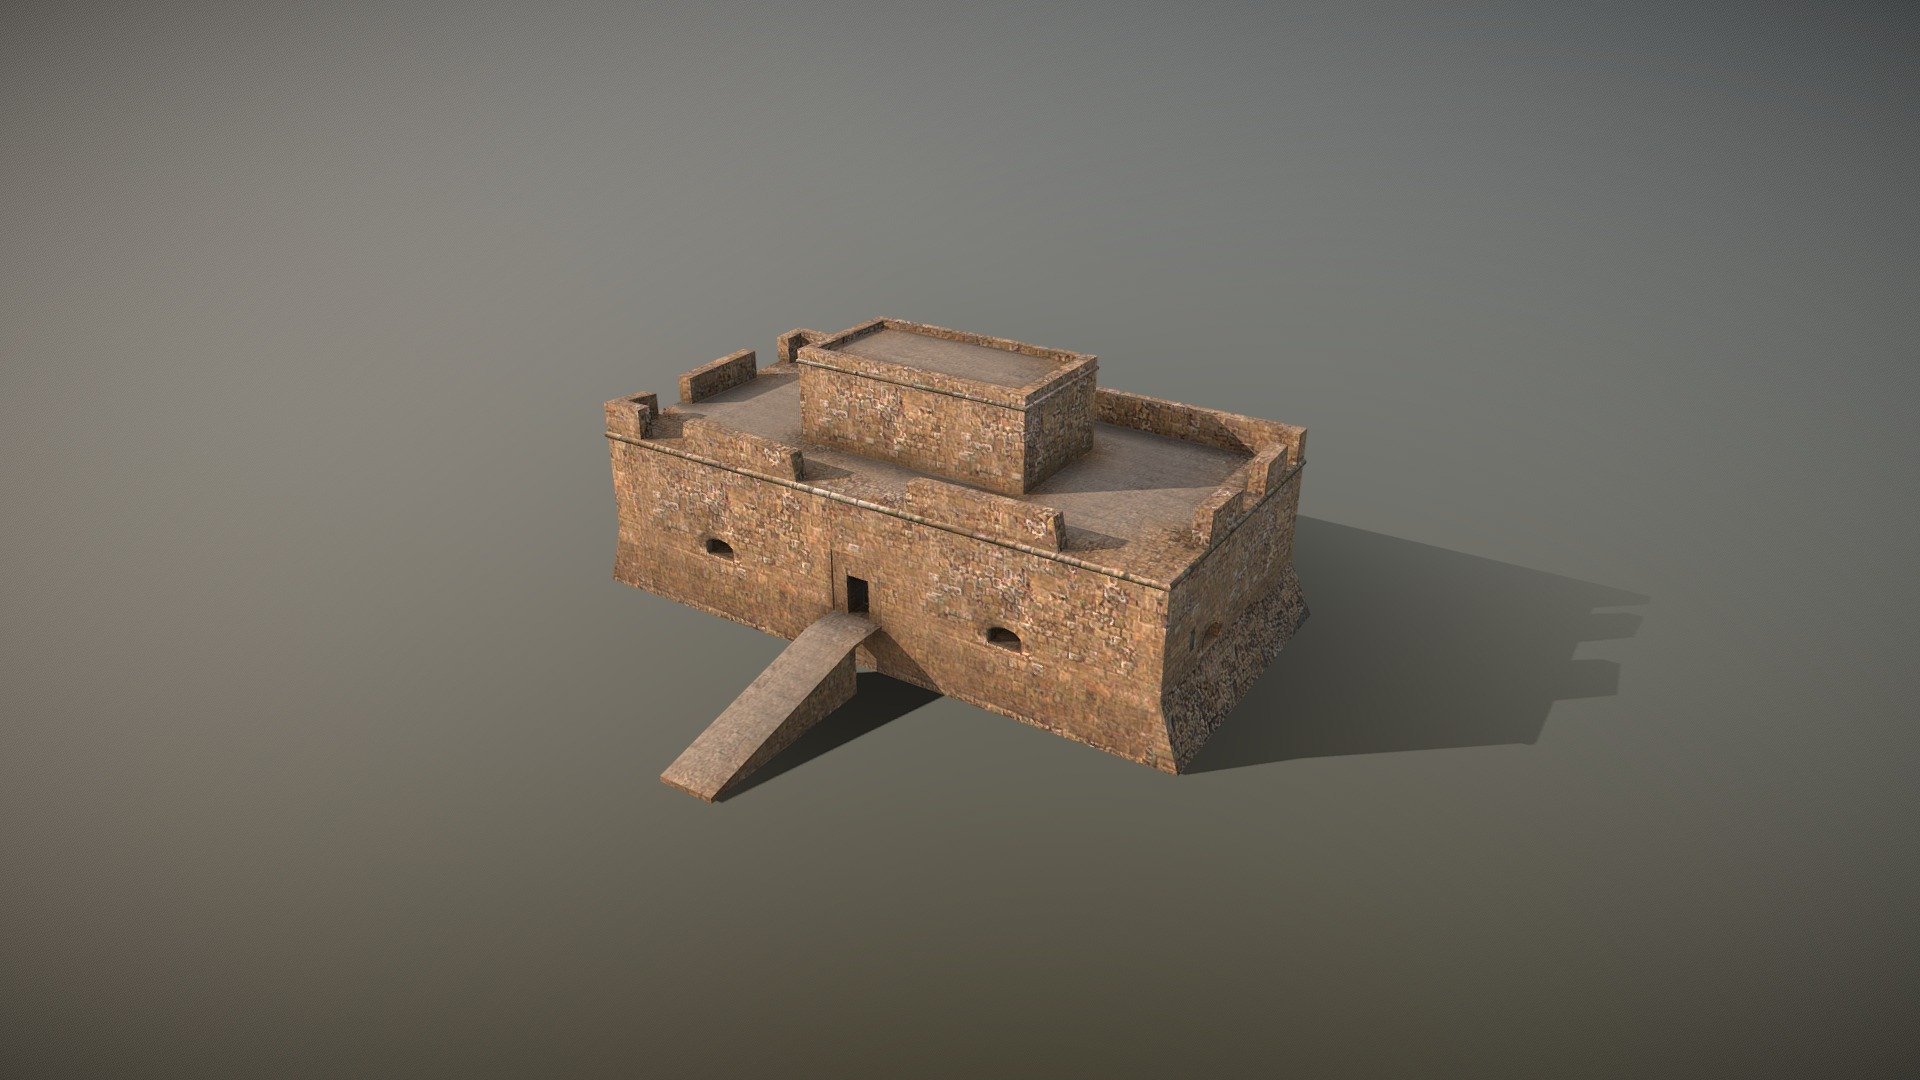 Building Pafos_Fort




LOD0 - (triangles 396) / (points 202)

Low-poly 3D model stone fort




Textures for PBR shader (Albedo, AmbietOcclusion, Gloss, Specular, NormalMap, Emission) they may be used with Unity3D, Unreal Engine. 

All pictures (previews) REALTIME rendering


Textures for NIGHT




Textures:




Pafos_Fort_Albedo.png         - 1024x1024

Pafos_Fort_AmbientOcclusion.png   - 1024x1024

Pafos_Fort_Gloss.png          - 1024x1024

Pafos_Fort_Specular.png       - 1024x1024

Pafos_Fort_NormalMap.png      - 1024x1024 

Pafos_Fort_Emission.png       - 1024x1024     



If you have questions about my models or need any kind of help, feel free to contact me and i'll do my best to help you 3d model